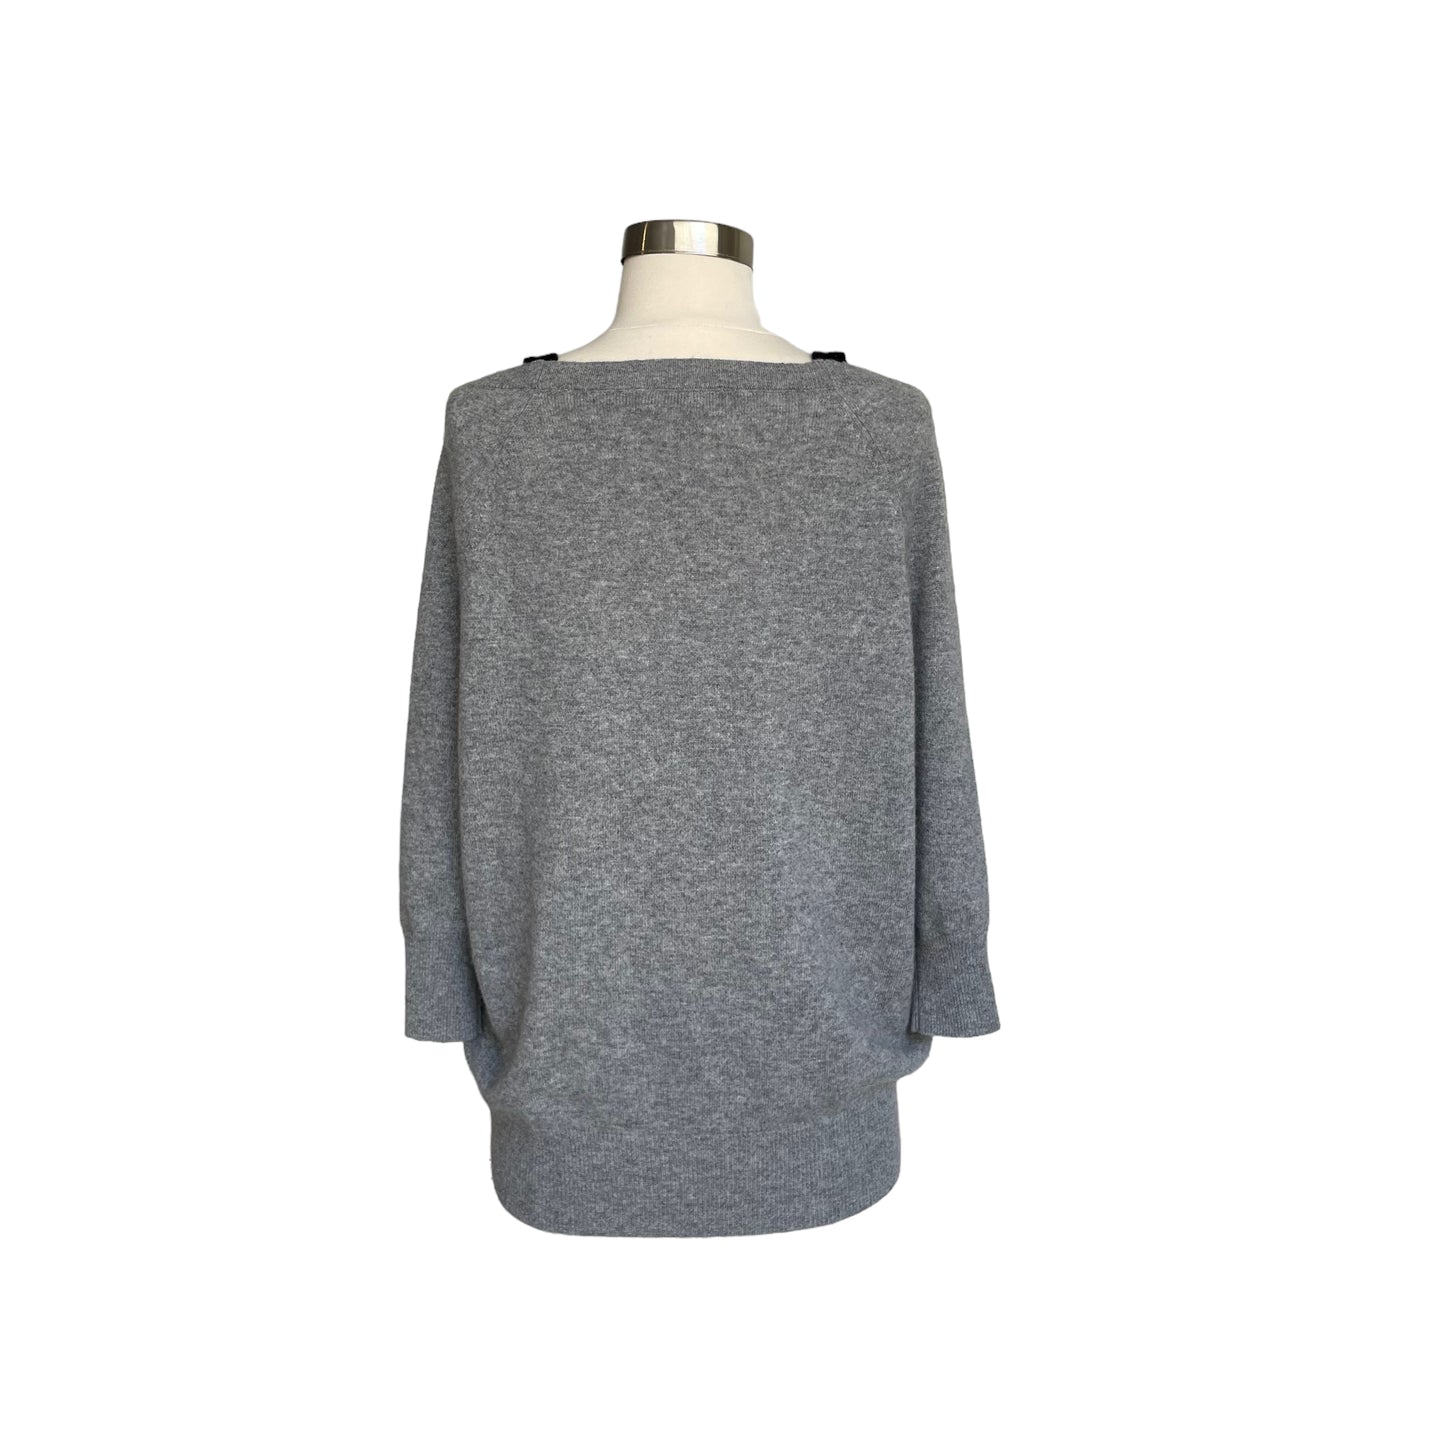 Grey and Black Cashmere Cardigan - S